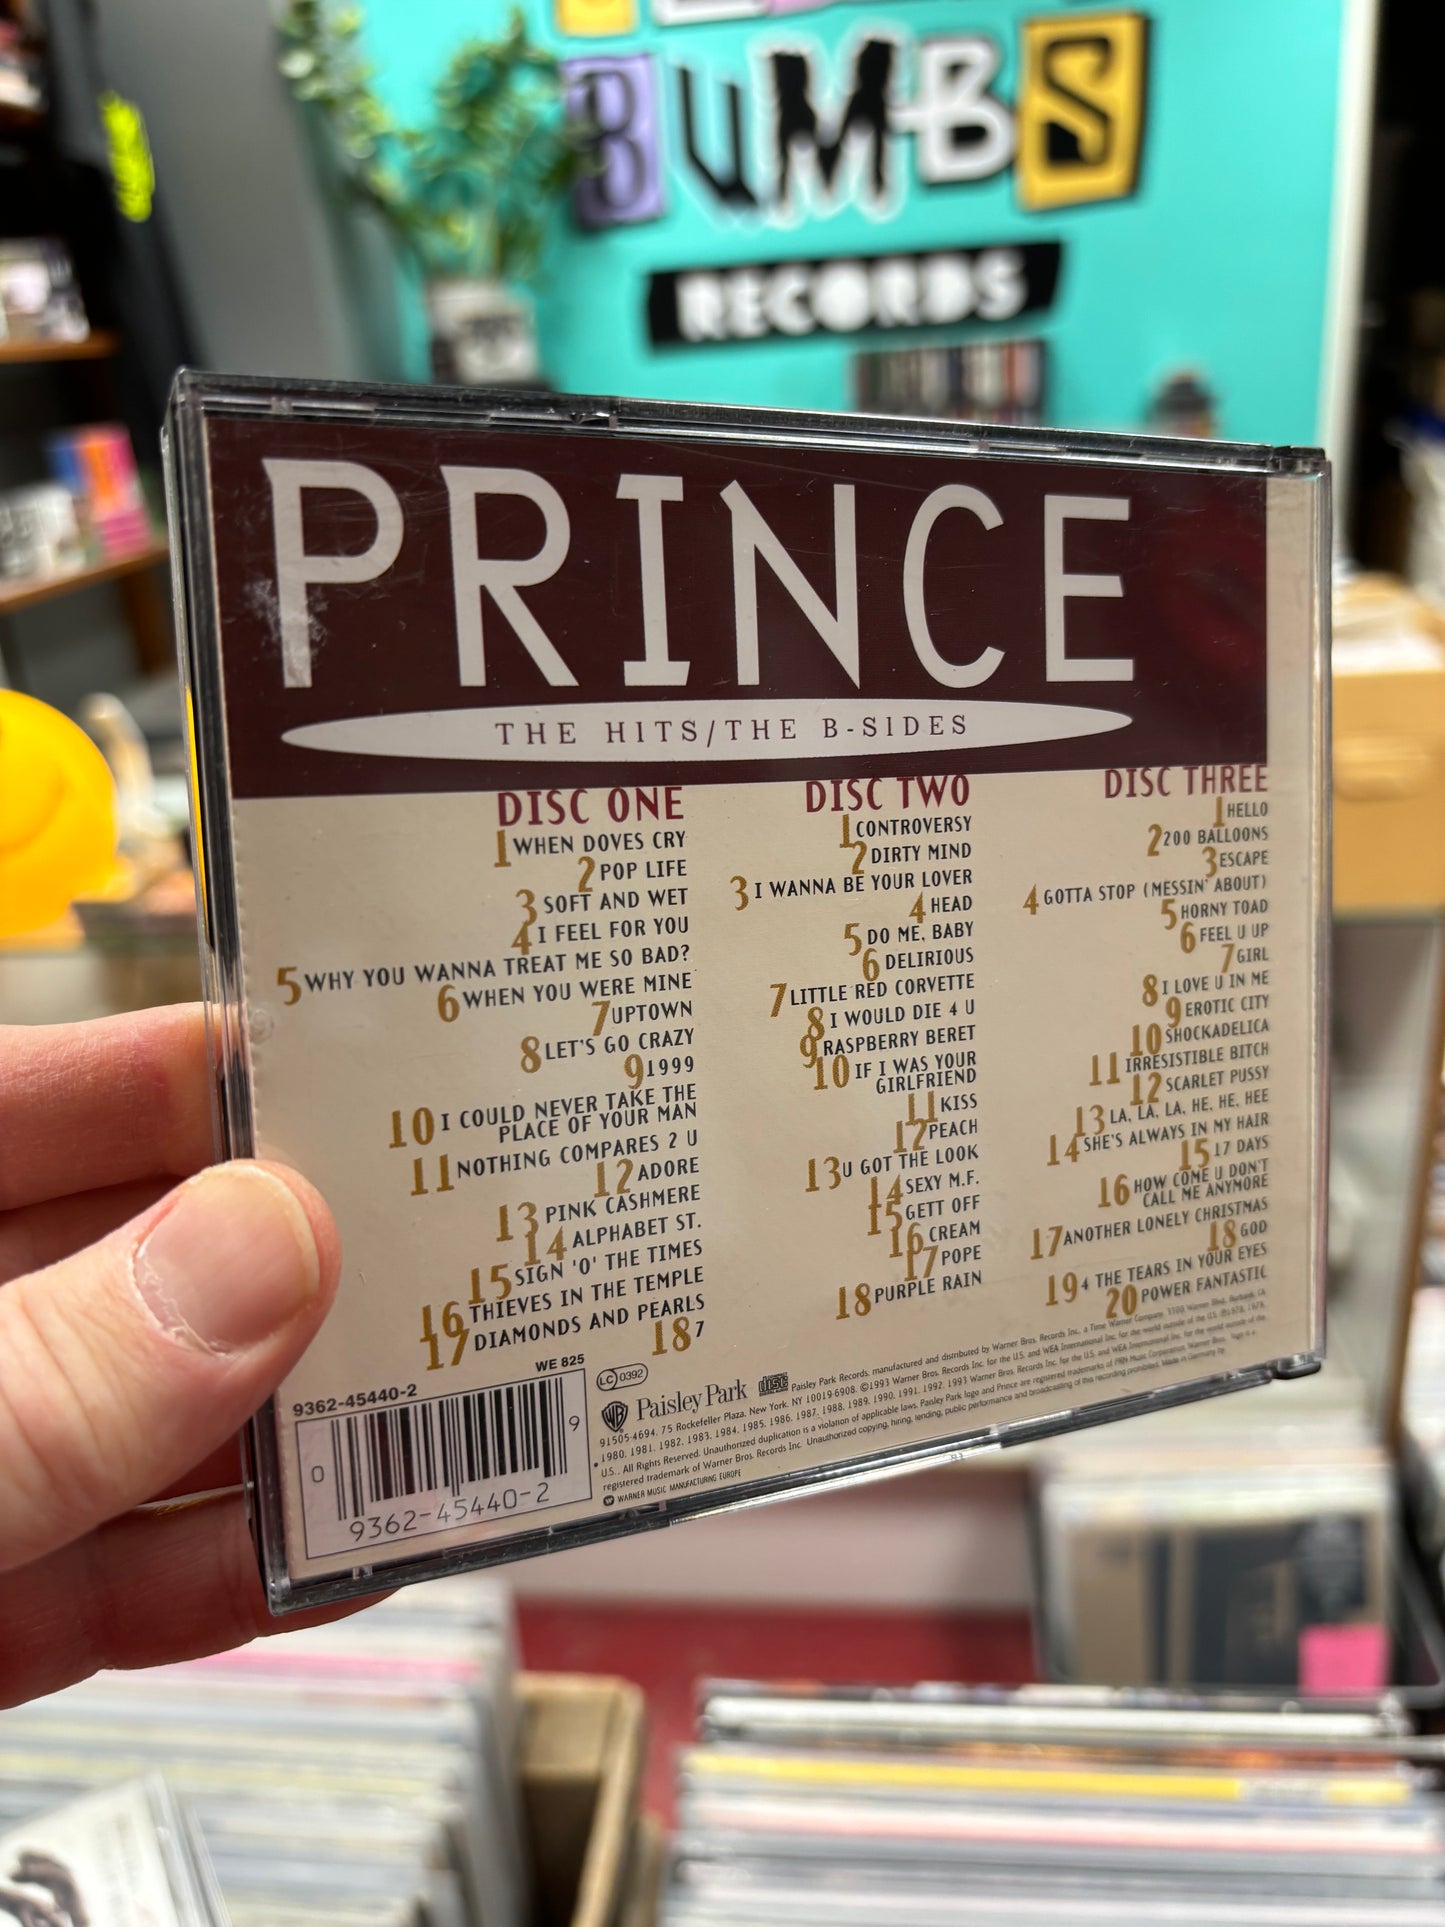 Prince: The Hits/The B-Sides, 3CD box, reissue, Europe 2004